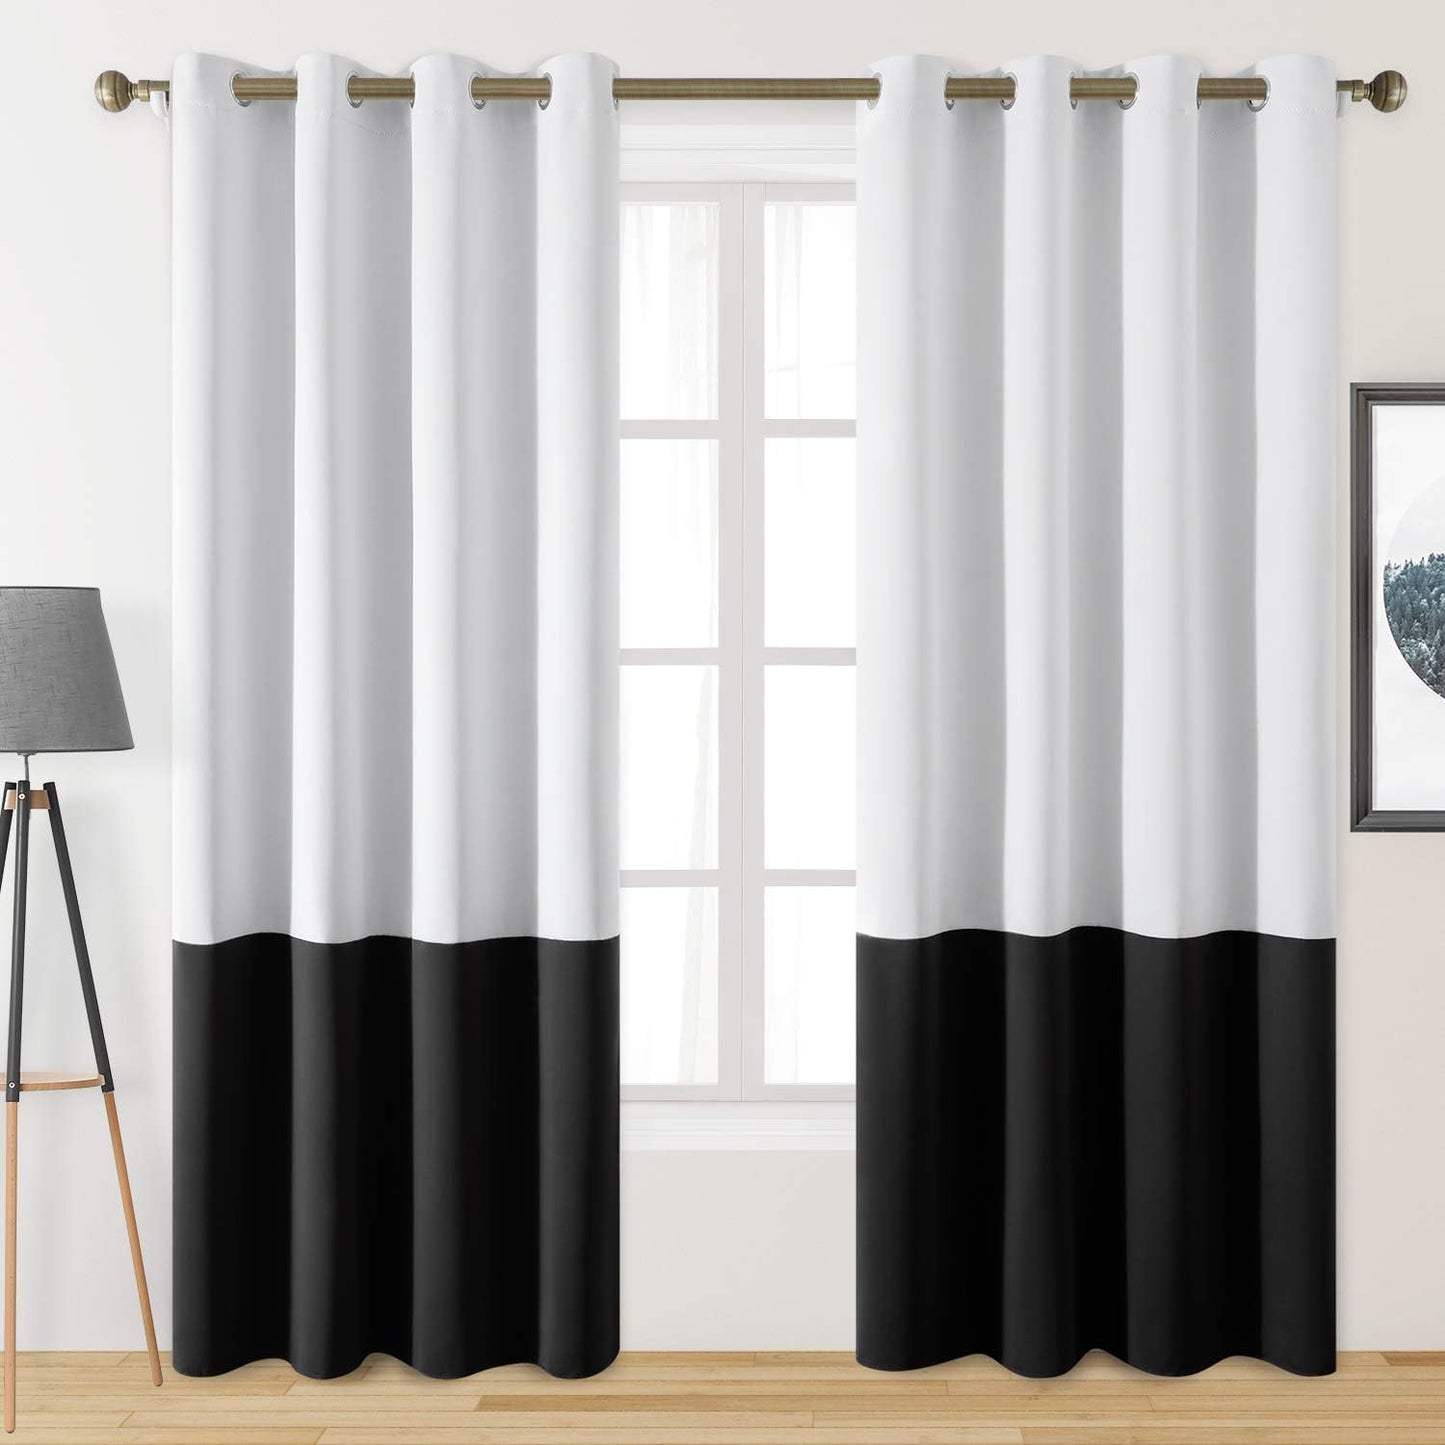 HOMEIDEAS Navy Blue Ombre Blackout Curtains 52 X 84 Inch Length Gradient Room Darkening Thermal Insulated Energy Saving Grommet 2 Panels Window Drapes for Living Room/Bedroom  HOMEIDEAS White/Black 52"W X 96"L 